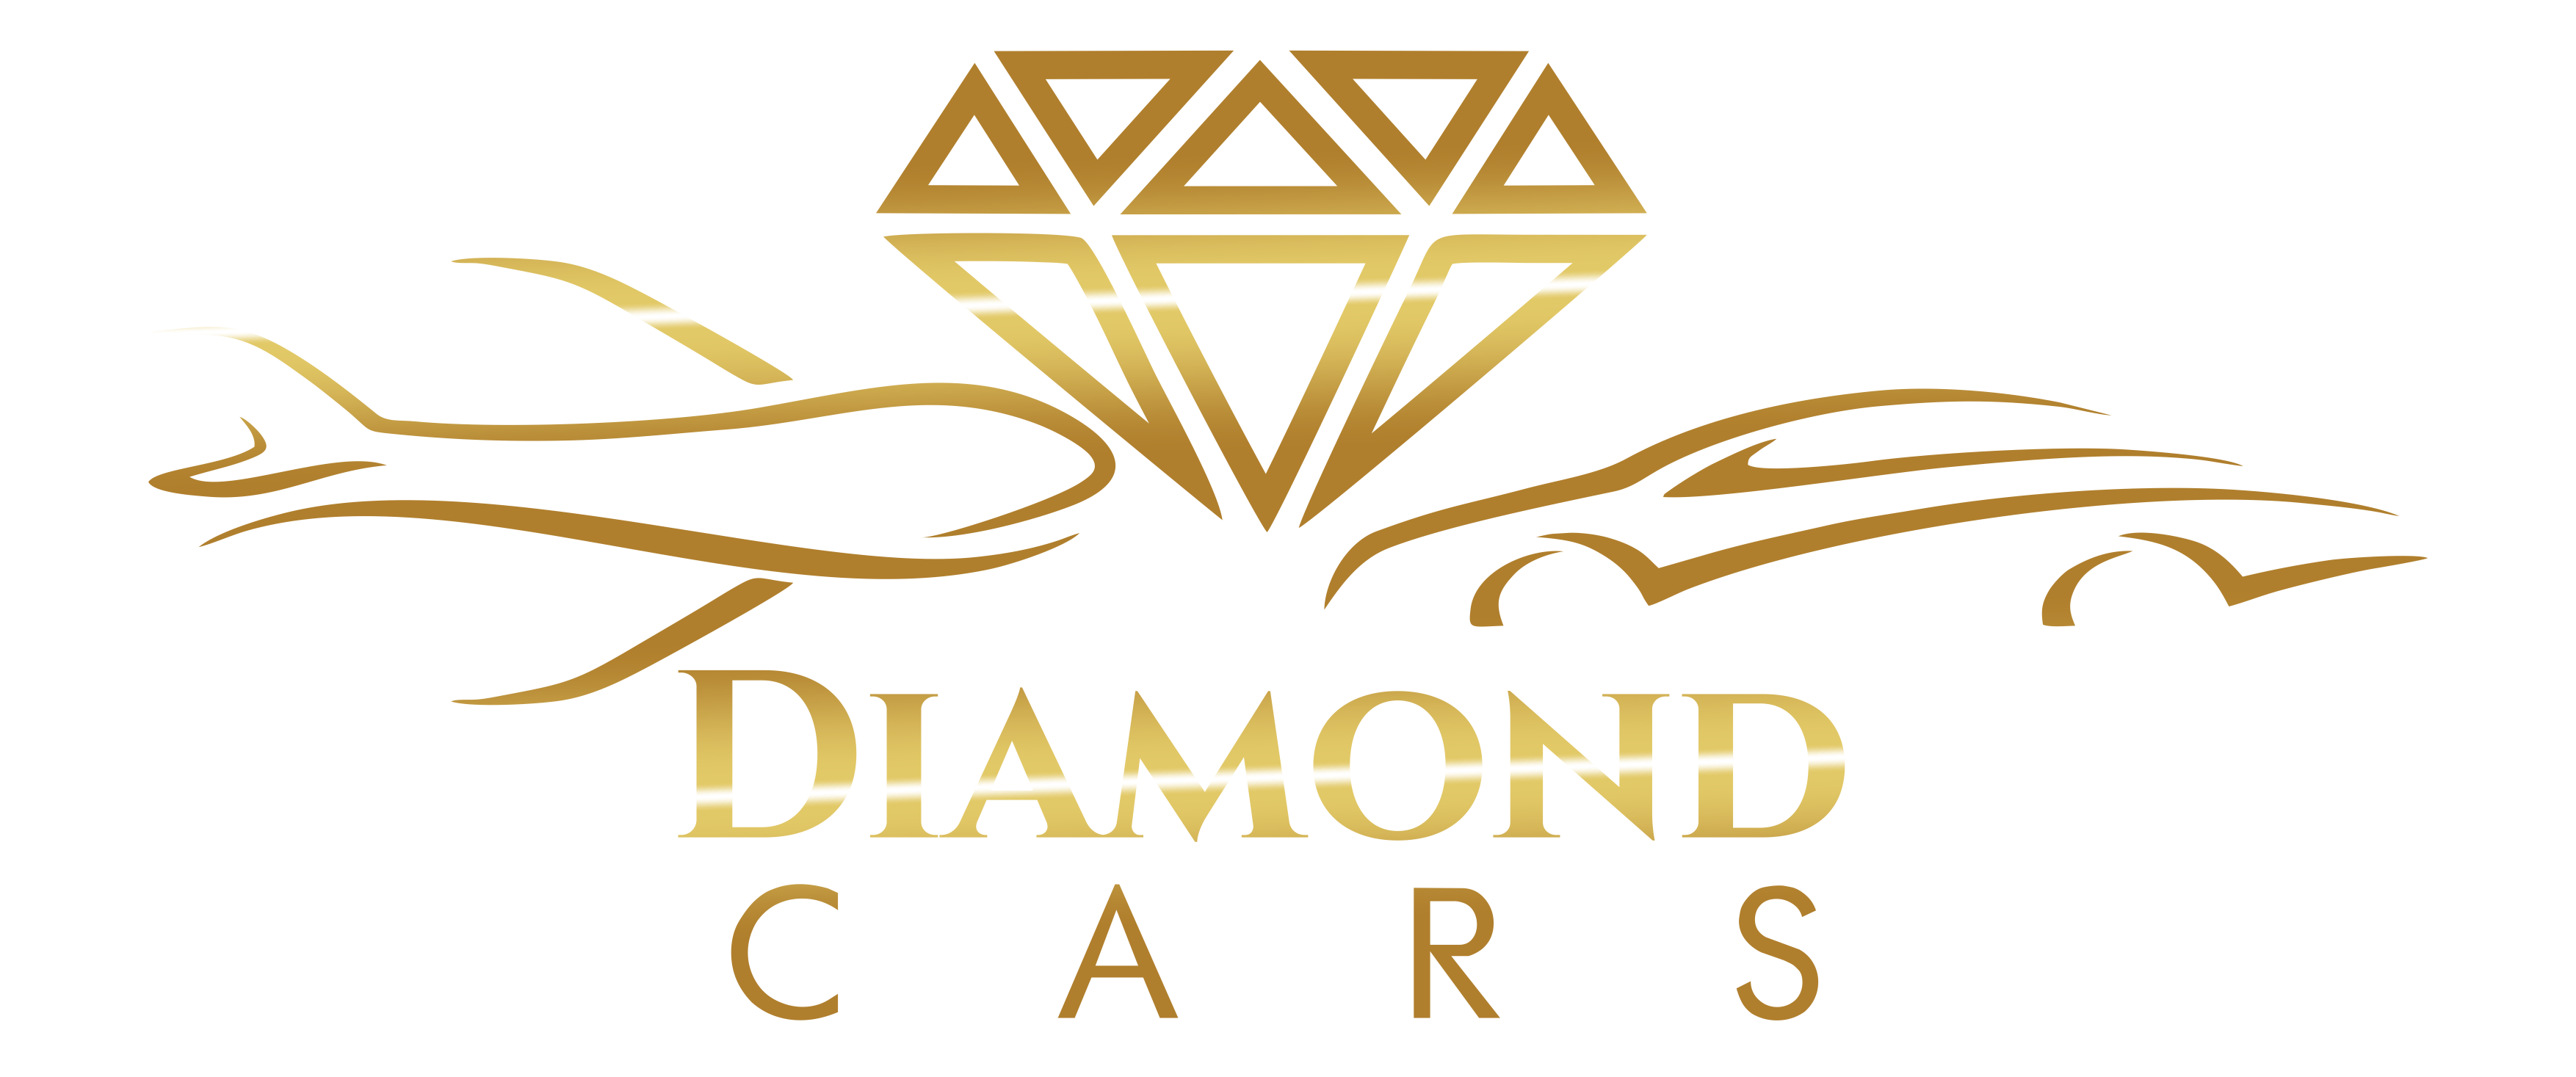 "Rely on Diamond Car for your airport transfers."